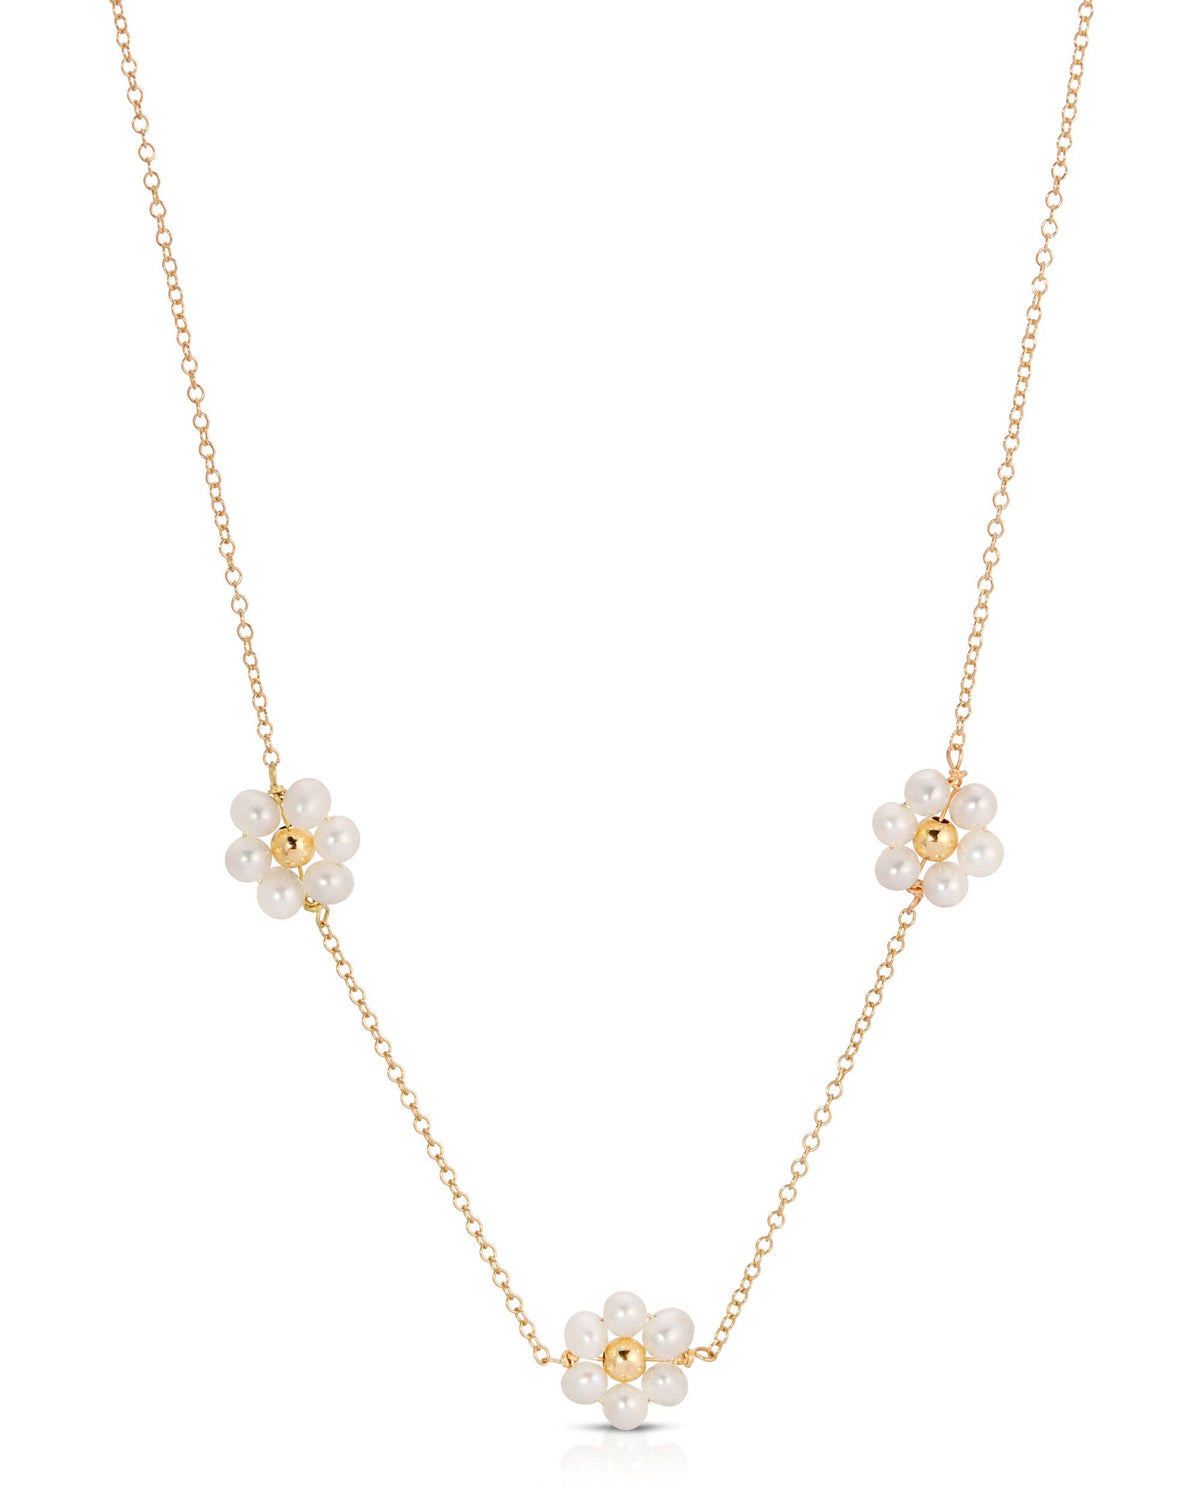 Fiores Flower Choker Necklace